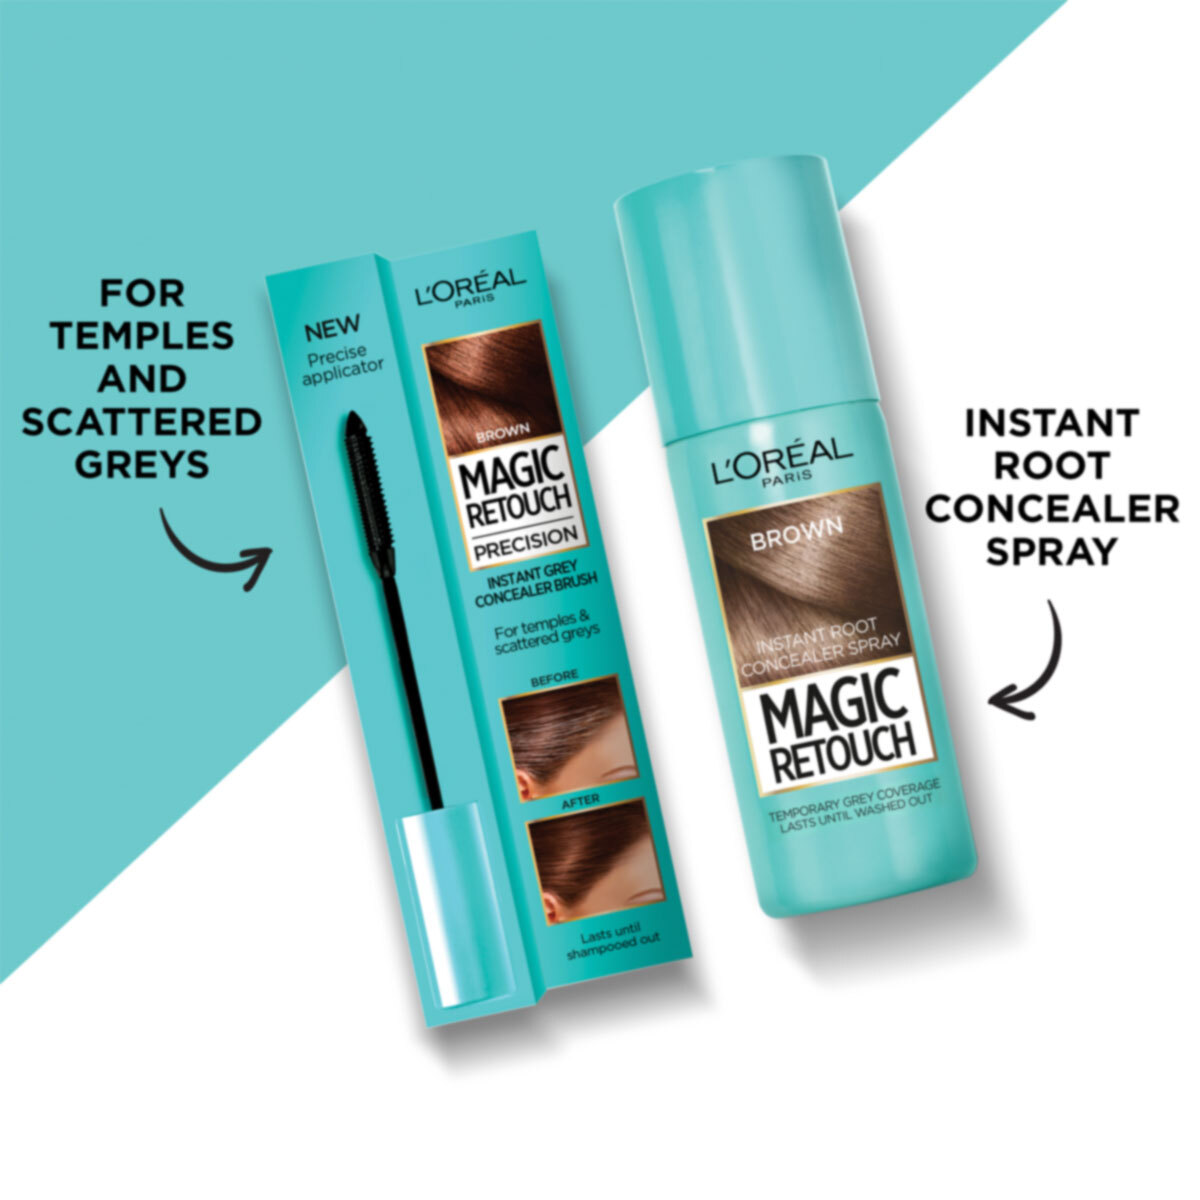 L'Oreal Magic Retouch Instant Root Concealer Spray, 3 x 75ml - Available in 3 Colours